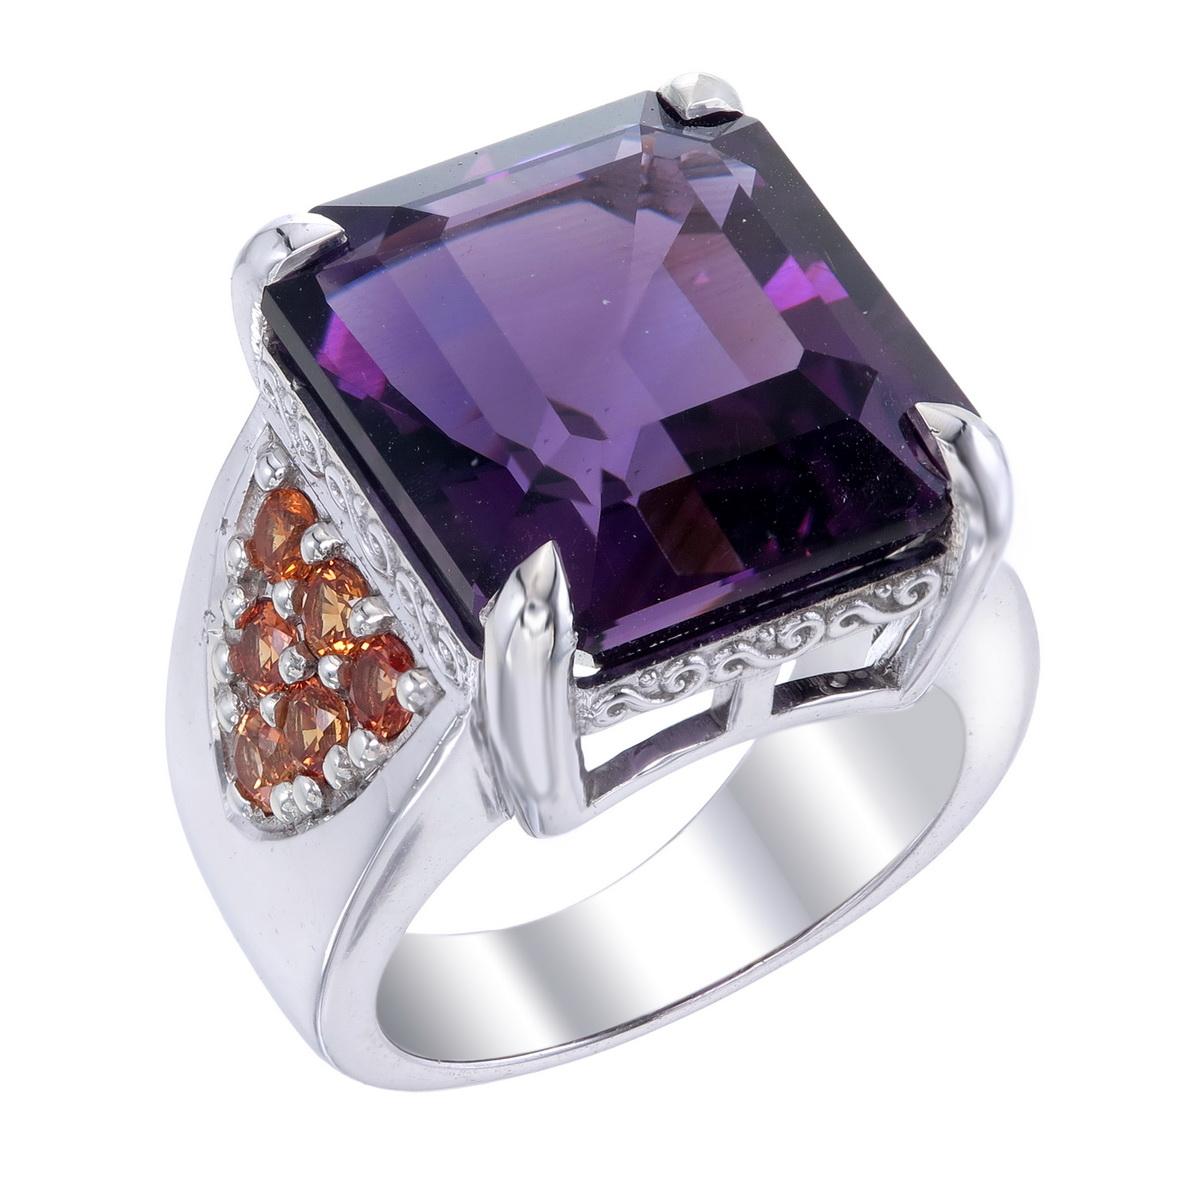 Orloff of Denmark; 16.91 carat Amethyst Sterling Silver Ring set with twelve Fancy Yellow Sapphires.

This piece has been fashioned out of 925 sterling silver, and features a 16.94 carat deep purple amethyst gem held by a claw setting of four sharp